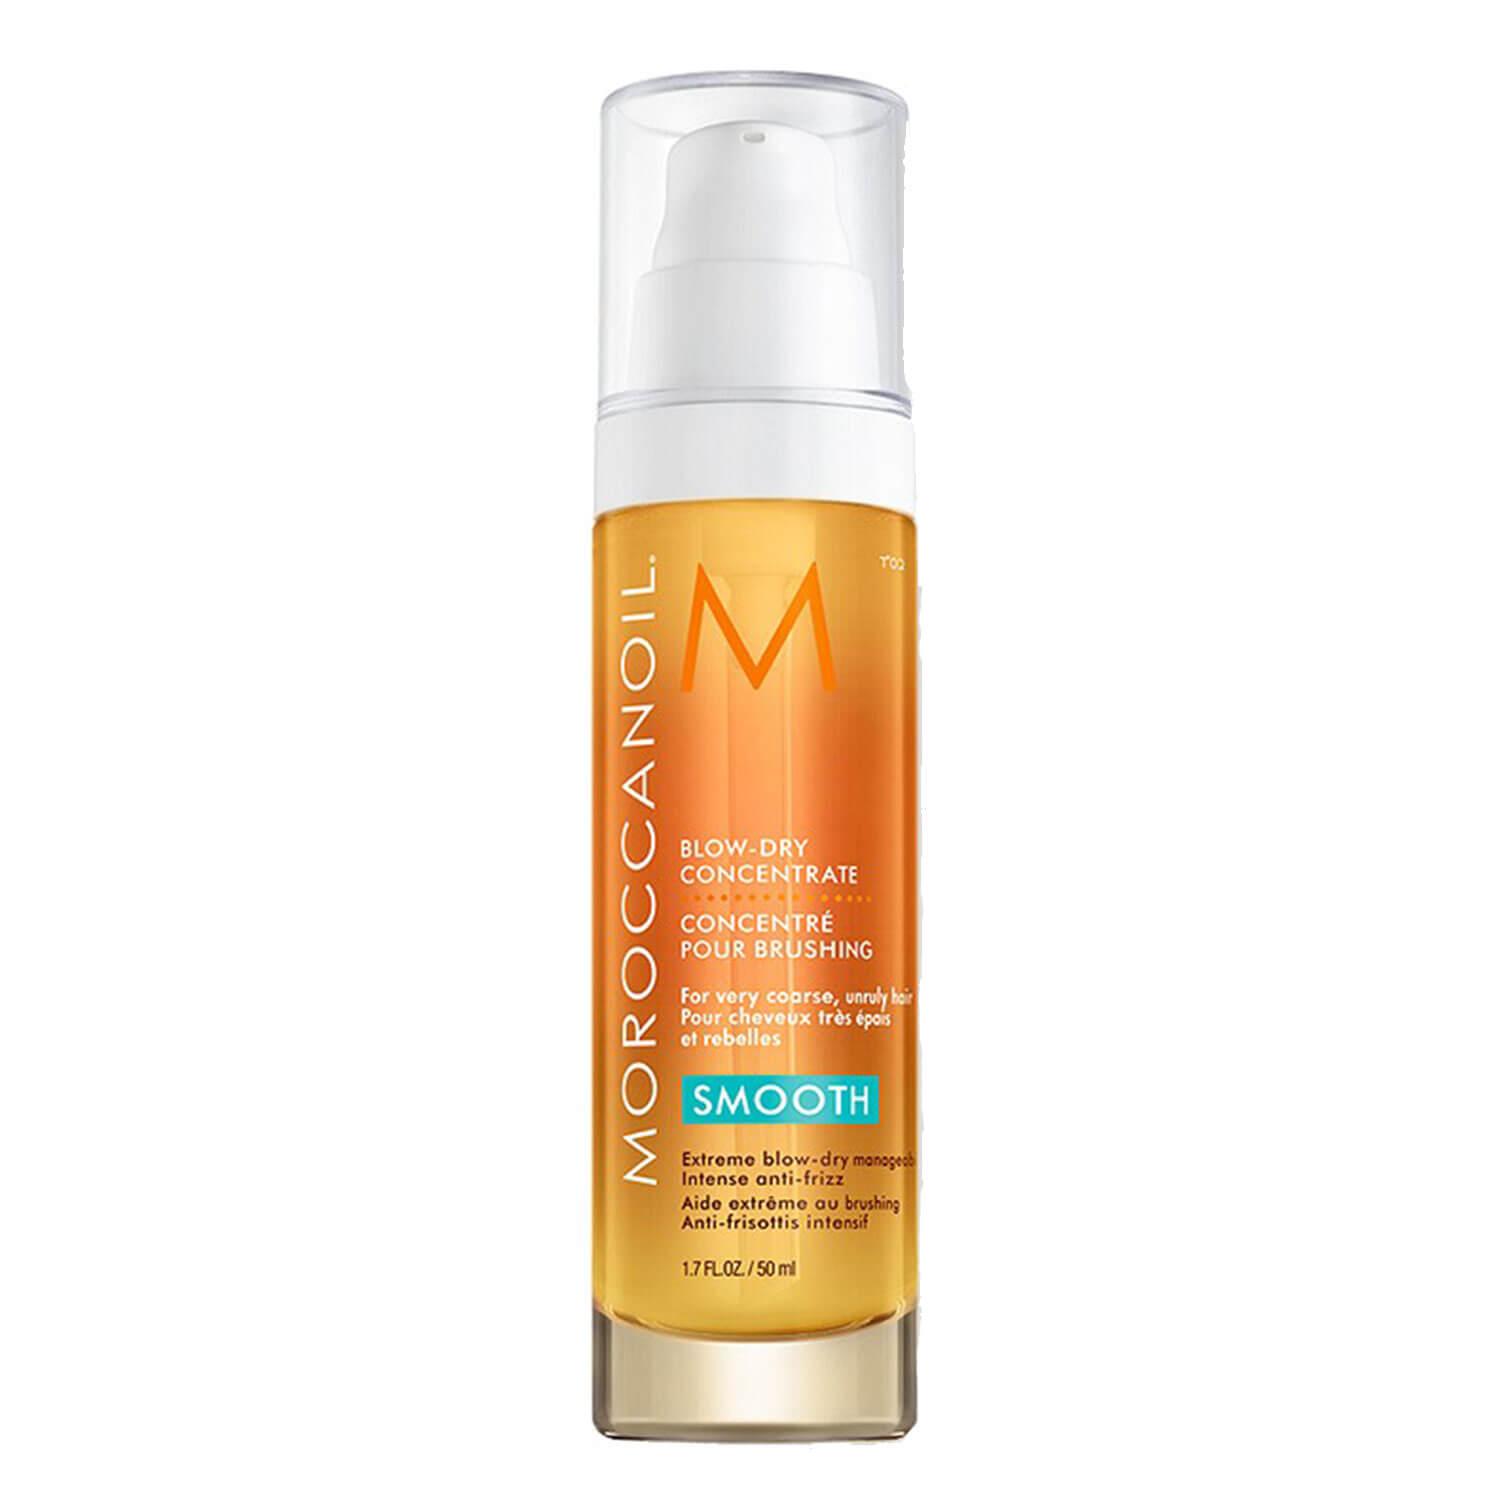 Moroccanoil - Blow-dry Concentrate